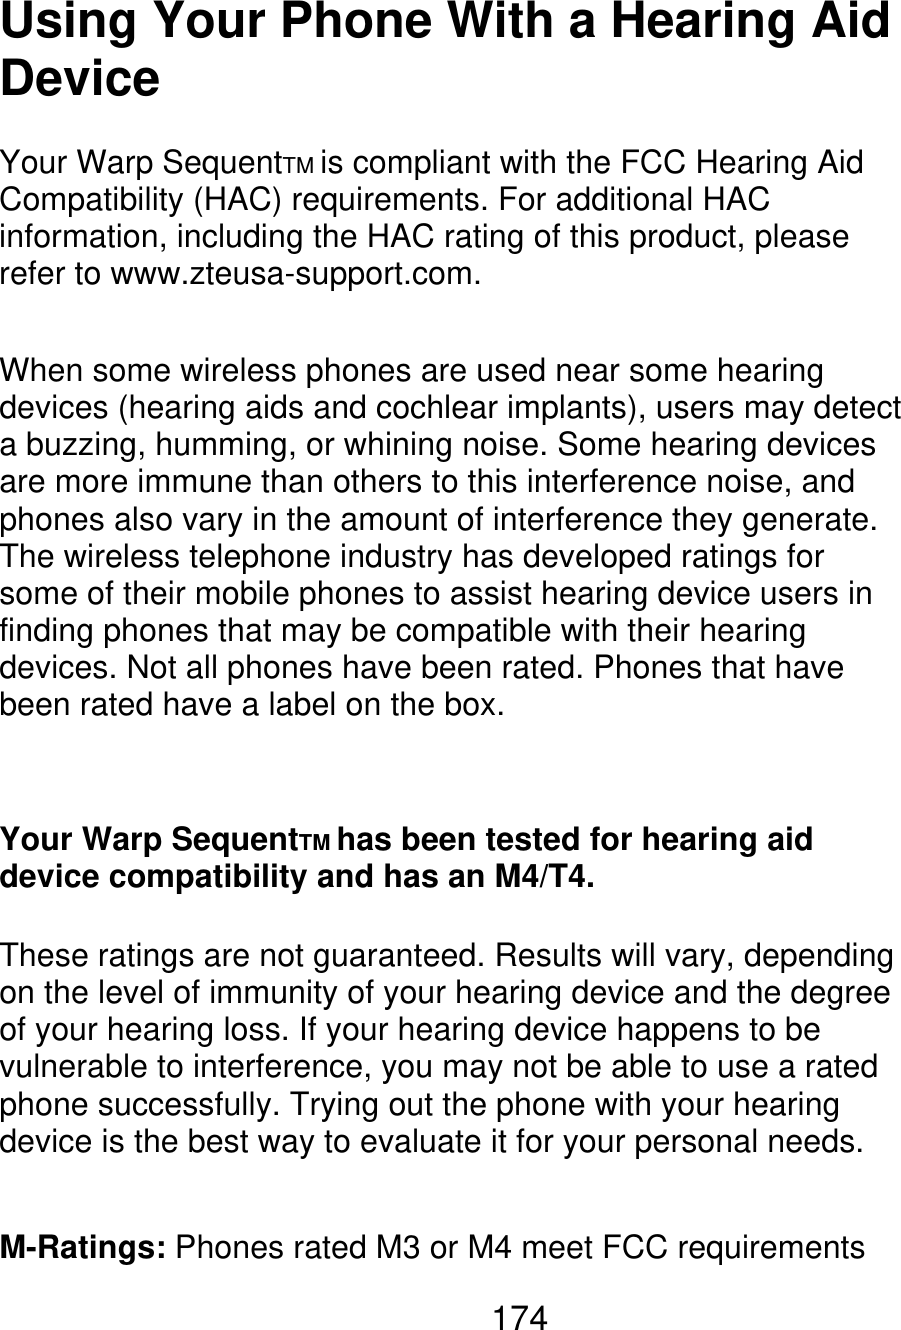 Using Your Phone With a Hearing Aid Device Your Warp SequentTM is compliant with the FCC Hearing Aid Compatibility (HAC) requirements. For additional HAC information, including the HAC rating of this product, please refer to www.zteusa-support.com. When some wireless phones are used near some hearing devices (hearing aids and cochlear implants), users may detect a buzzing, humming, or whining noise. Some hearing devices are more immune than others to this interference noise, and phones also vary in the amount of interference they generate. The wireless telephone industry has developed ratings for some of their mobile phones to assist hearing device users in finding phones that may be compatible with their hearing devices. Not all phones have been rated. Phones that have been rated have a label on the box. Your Warp SequentTM has been tested for hearing aid device compatibility and has an M4/T4. These ratings are not guaranteed. Results will vary, depending on the level of immunity of your hearing device and the degree of your hearing loss. If your hearing device happens to be vulnerable to interference, you may not be able to use a rated phone successfully. Trying out the phone with your hearing device is the best way to evaluate it for your personal needs. M-Ratings: Phones rated M3 or M4 meet FCC requirements 174 